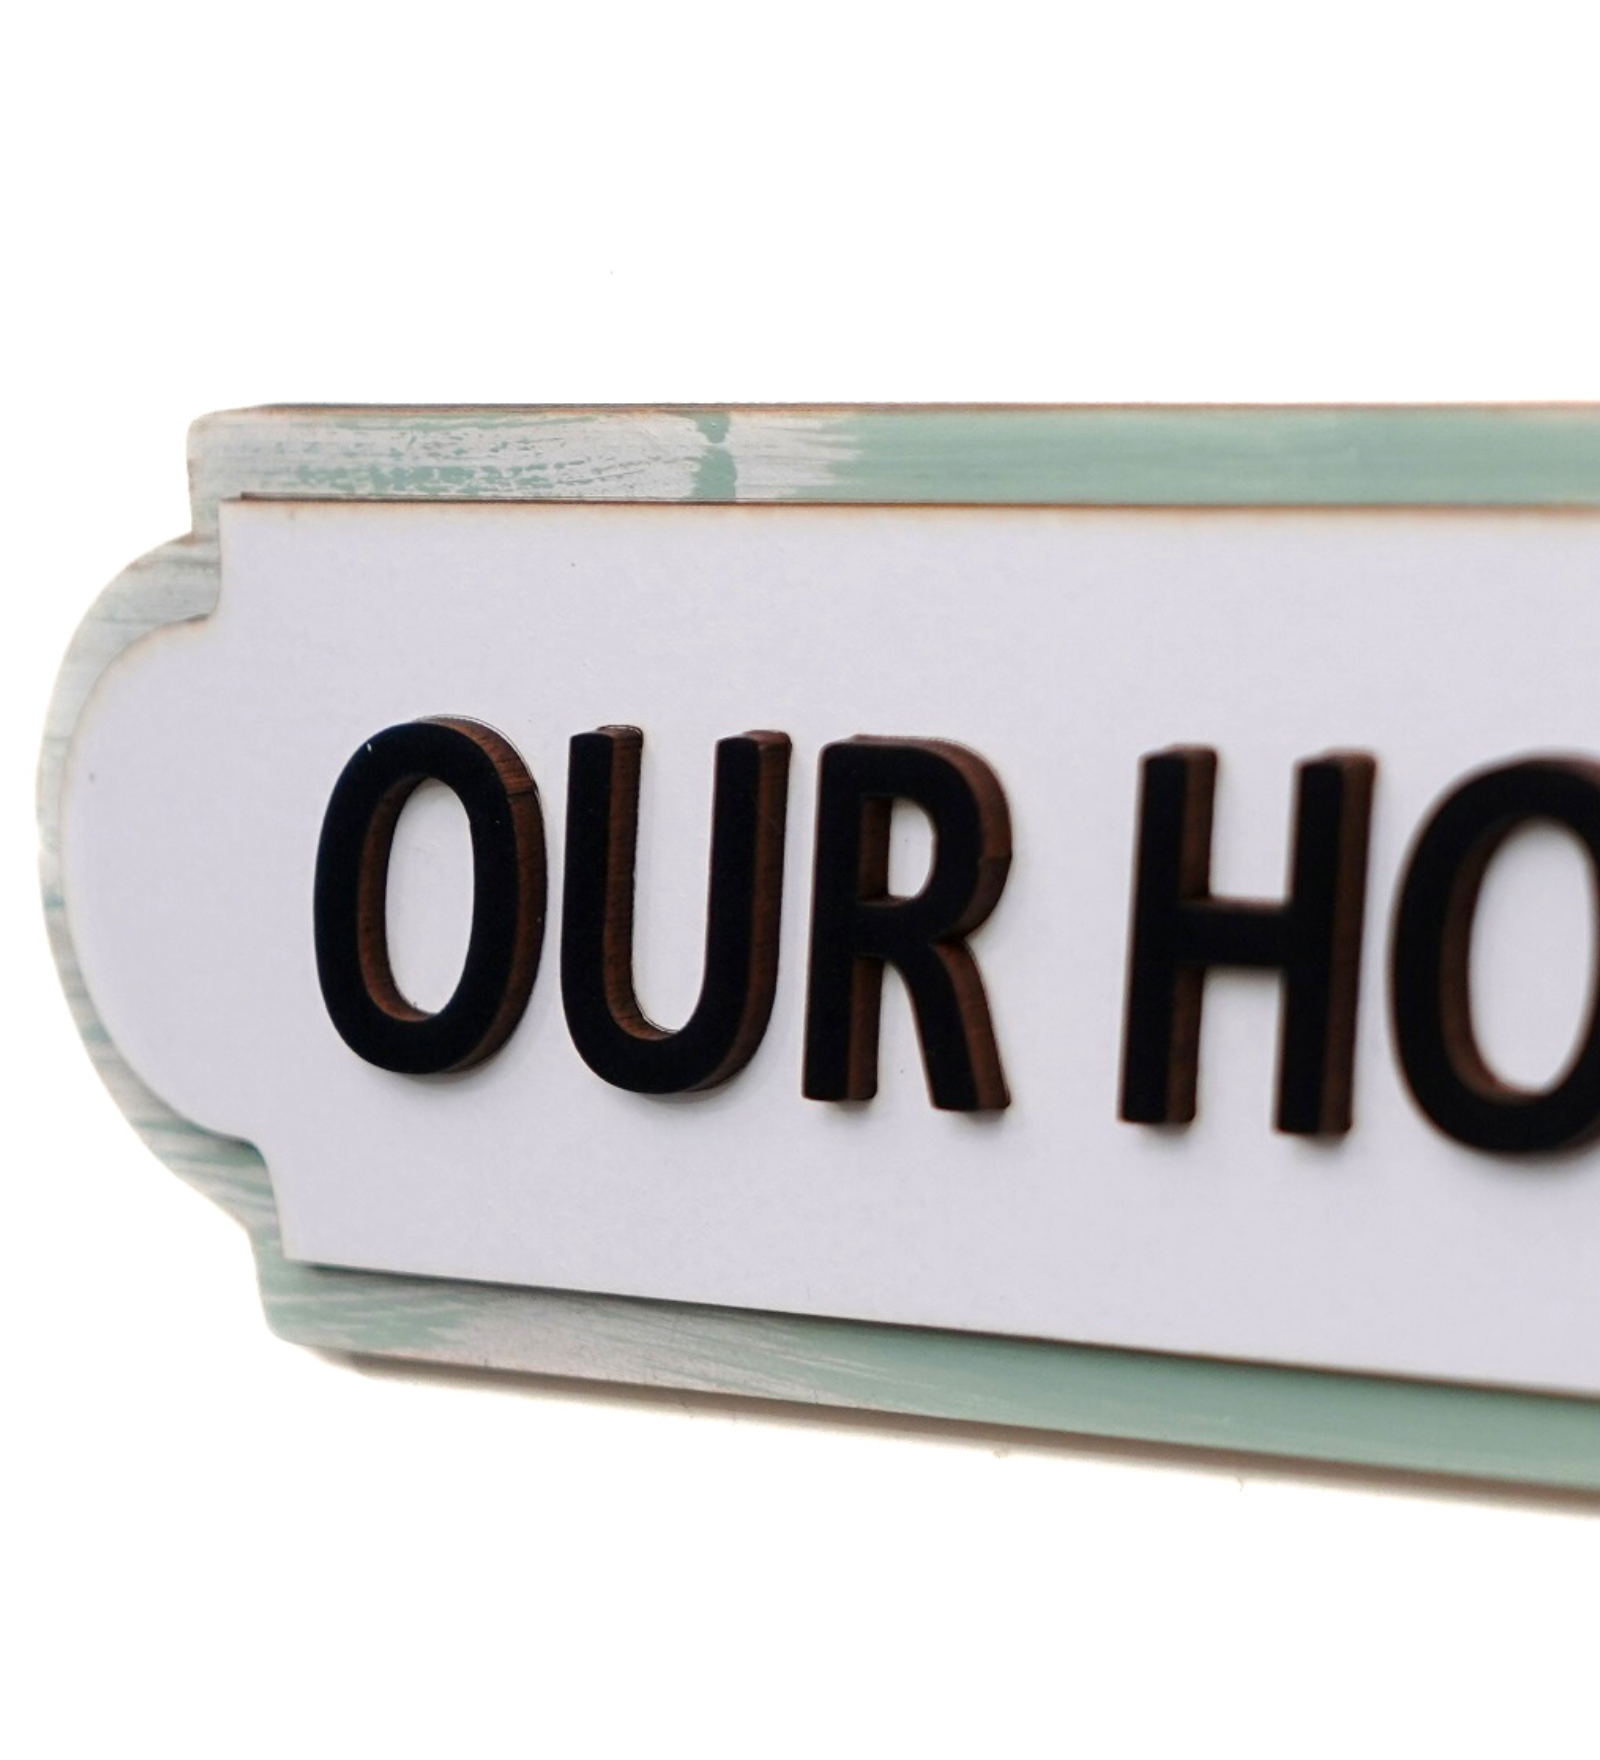 Our Home 3D Layered Wooden Sign Board Wemy Store